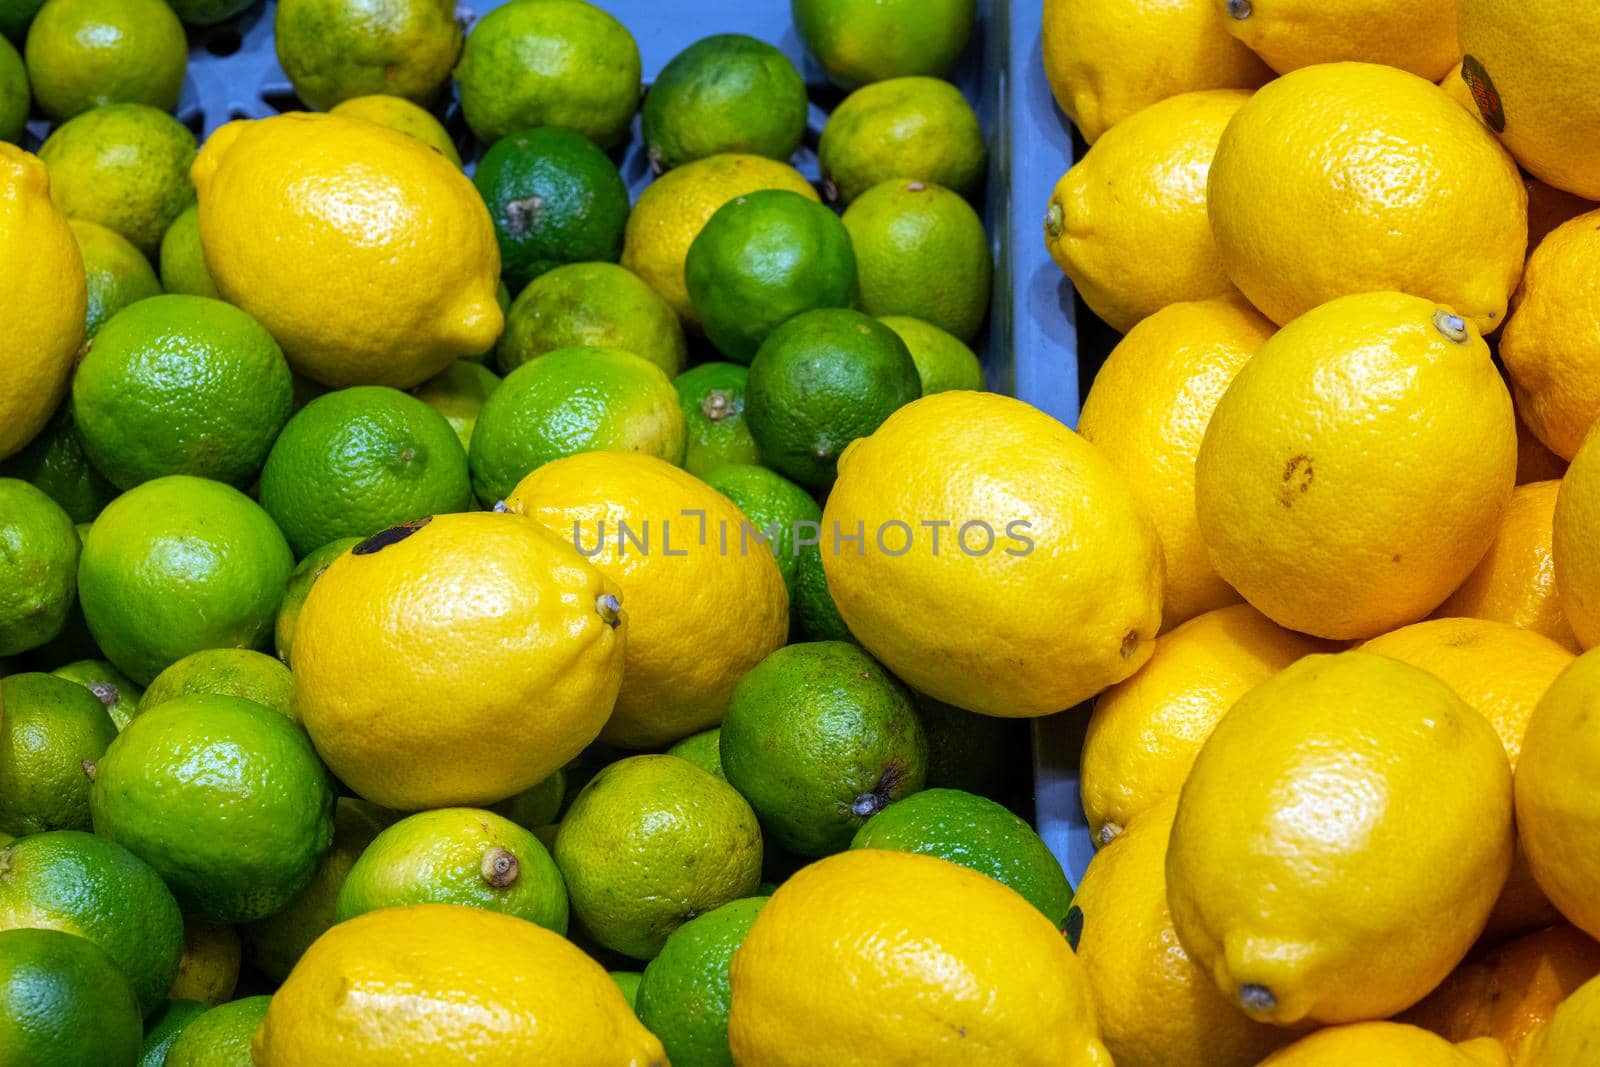 Green limes and yellow lemons for sale at a market